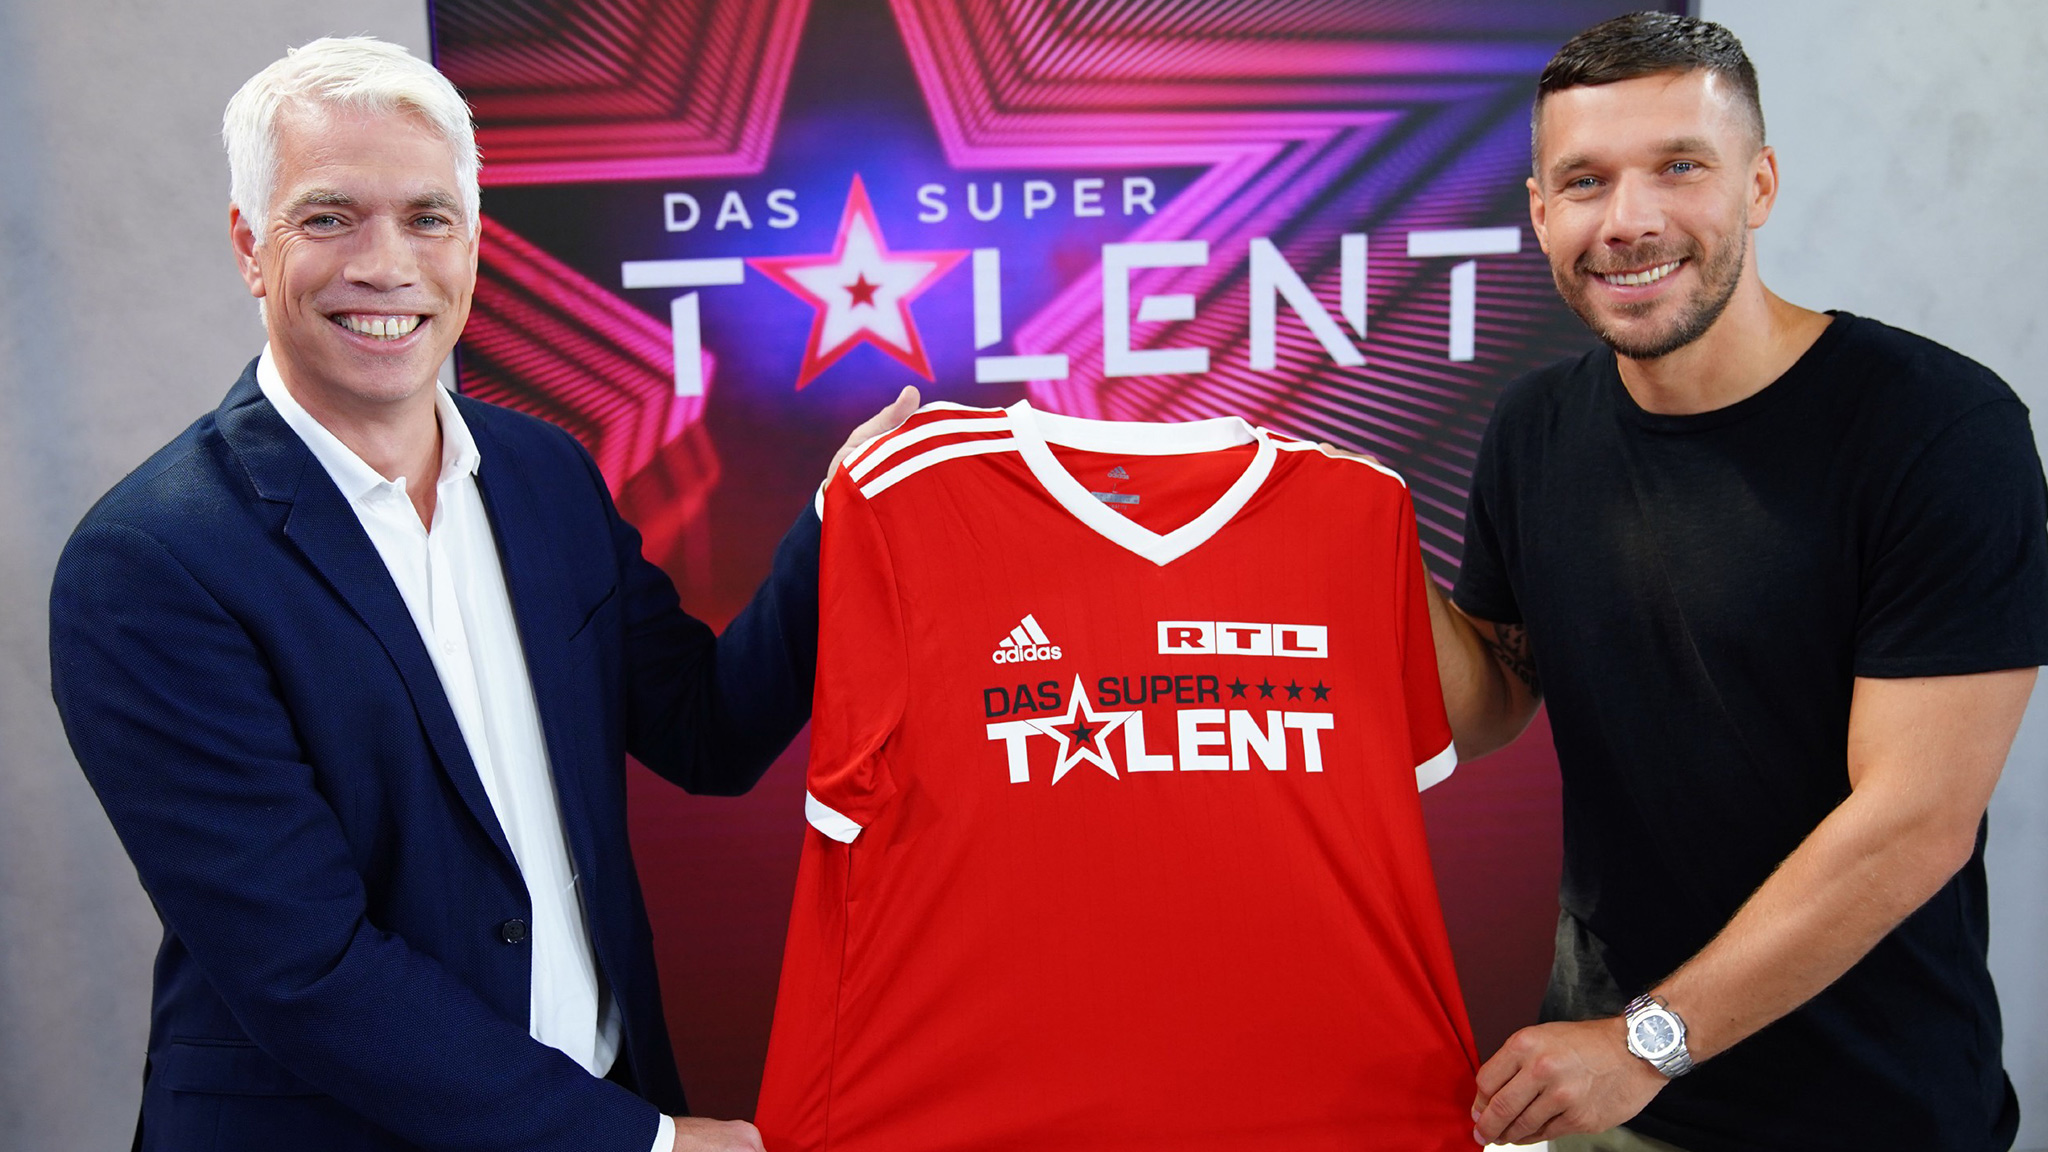 Super talent: soccer player Lukas Podolski is now part of the jury